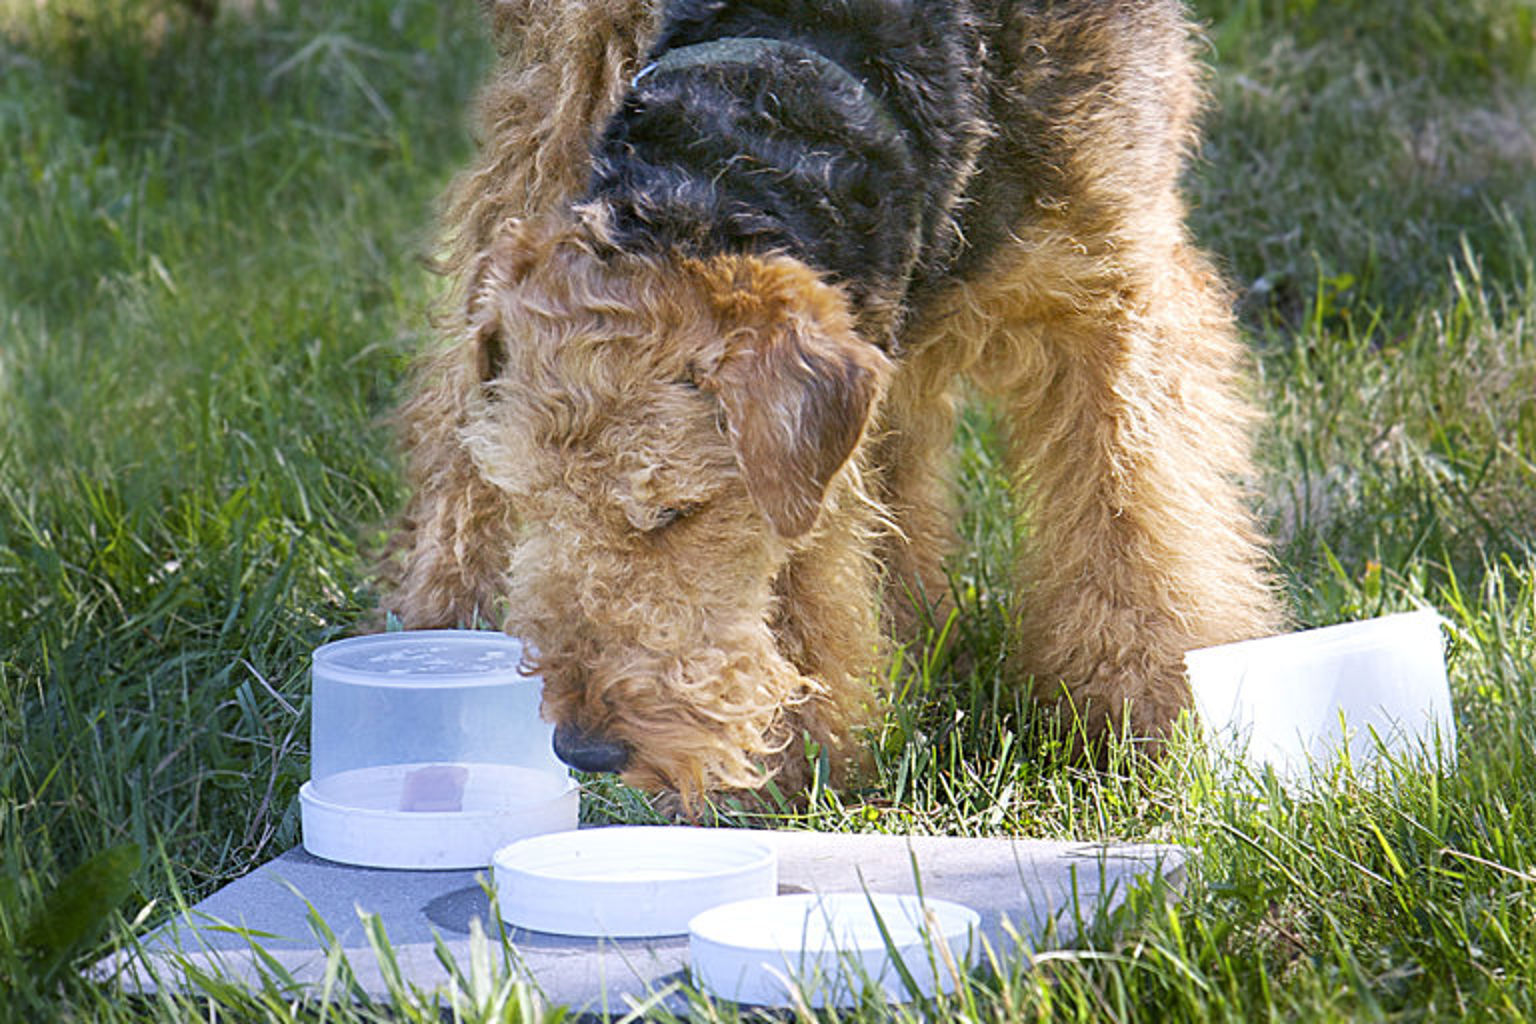 Airedale terrier sniffing treats during a behavioral assessment